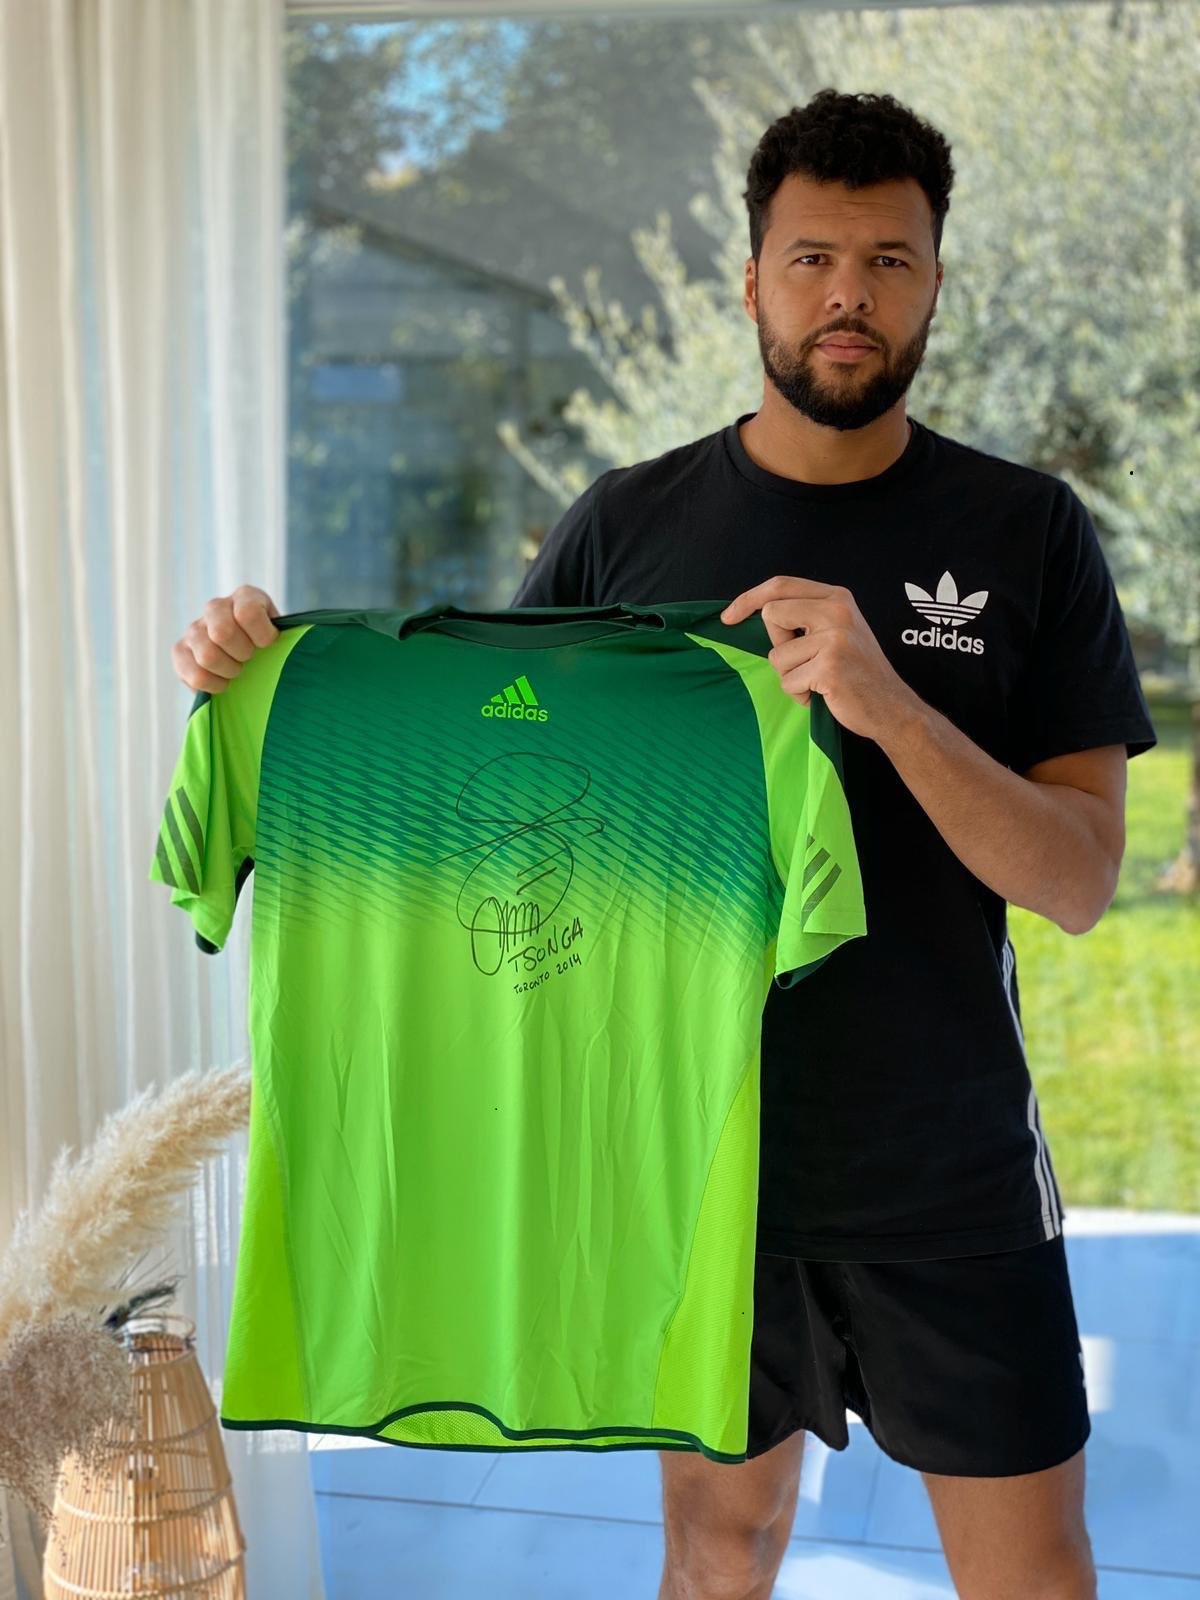 Jo Wilfred Tsonga with his autographed shirt that he is putting up for auction in the fight against COVID-19 virus.